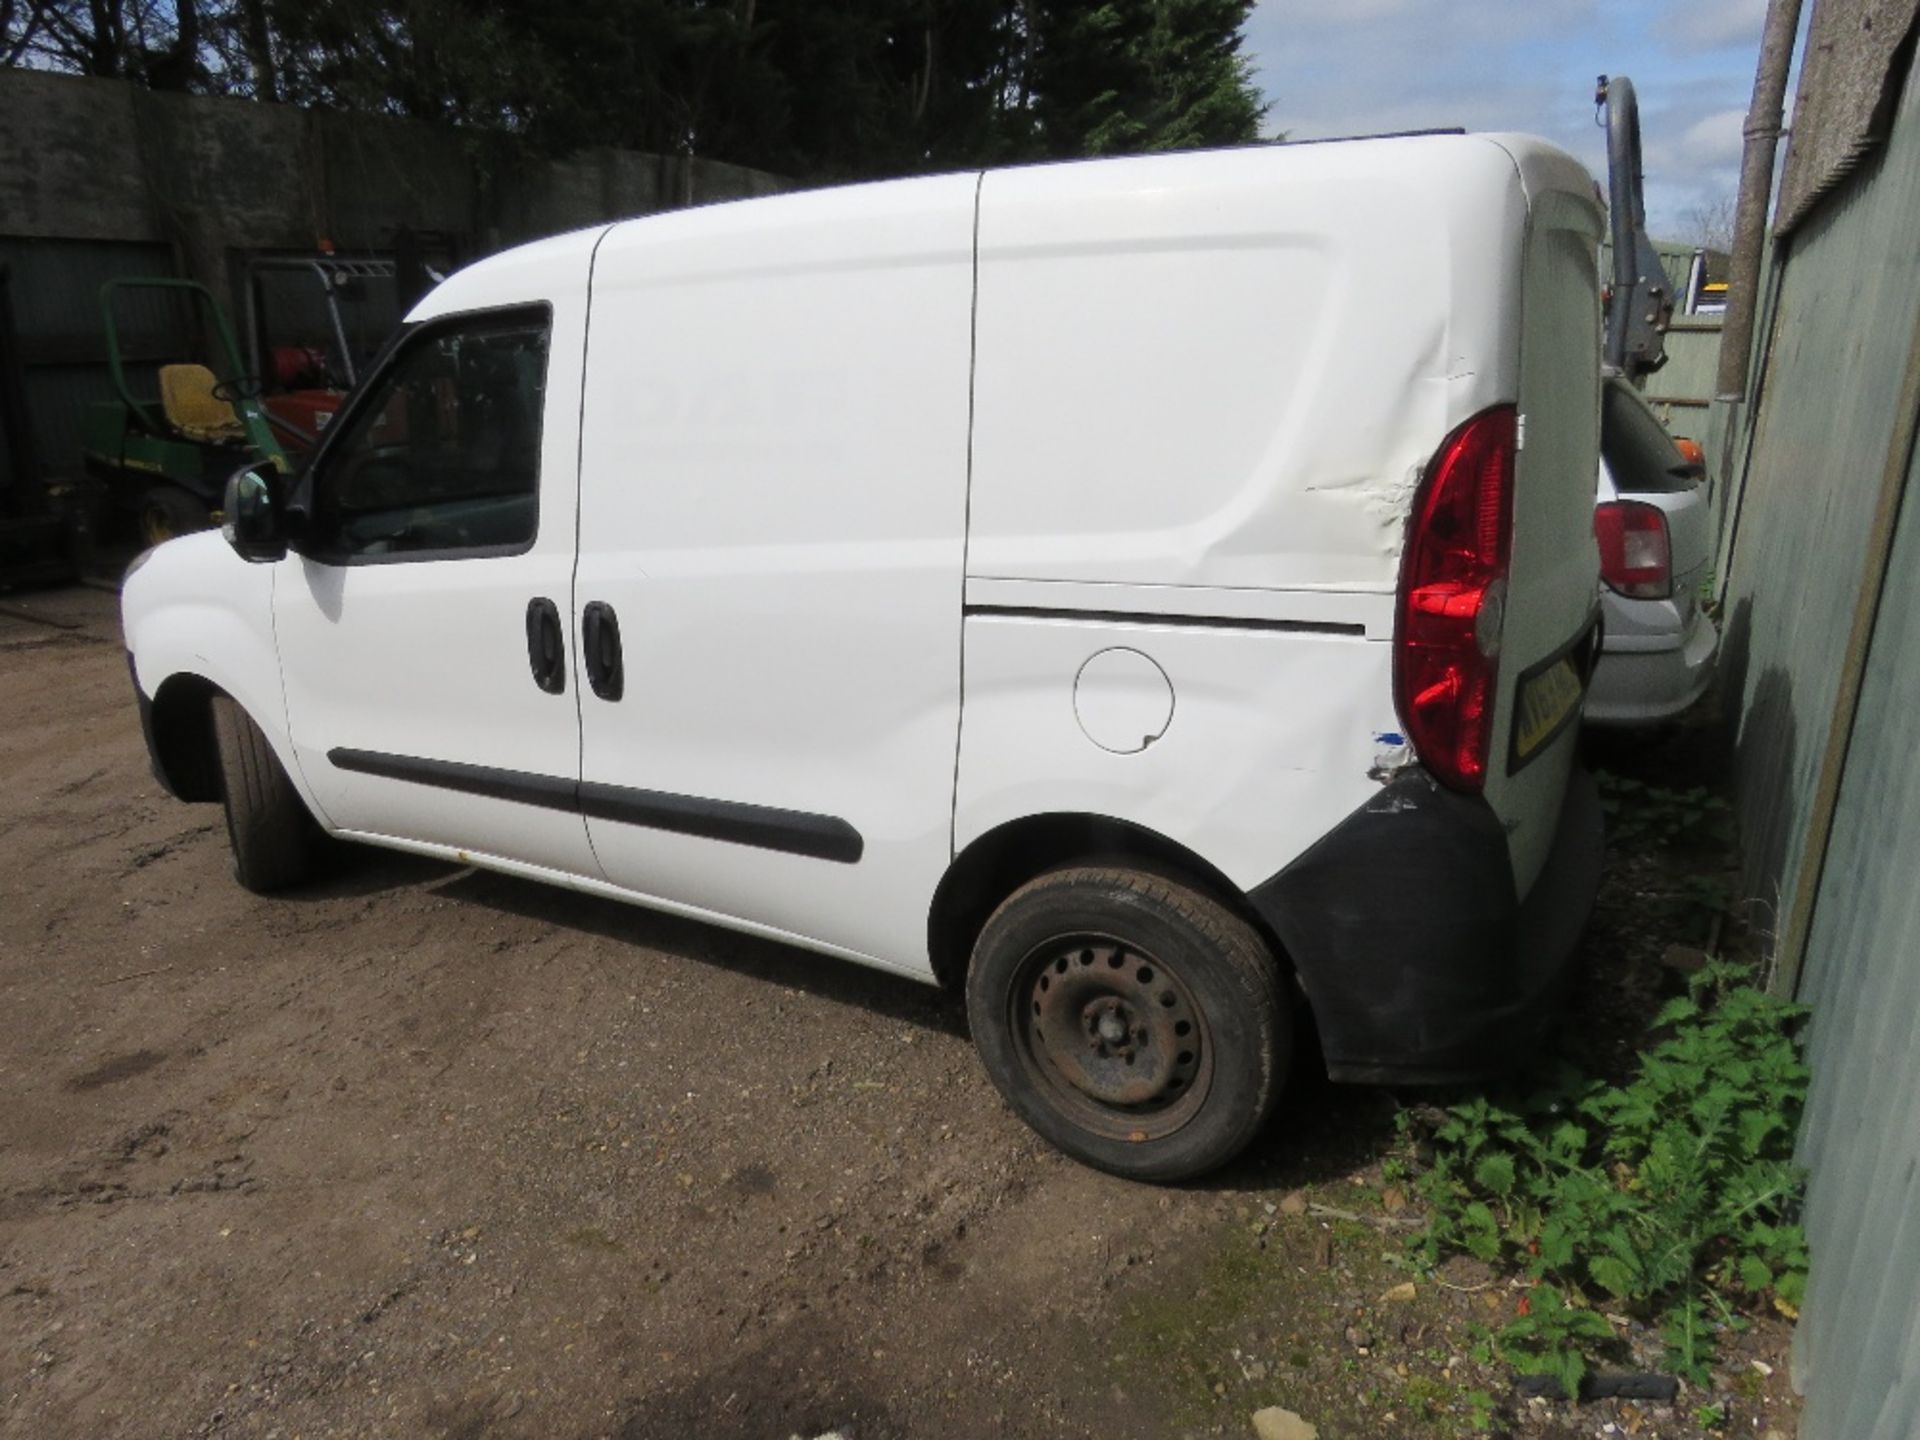 FIAT DOBLO PANEL VAN REG: WV63 HCJ. 84343 REC MILES. WHEN TESTED WAS SEEN TO DRIVE, STEER AND BRAKE. - Image 4 of 12